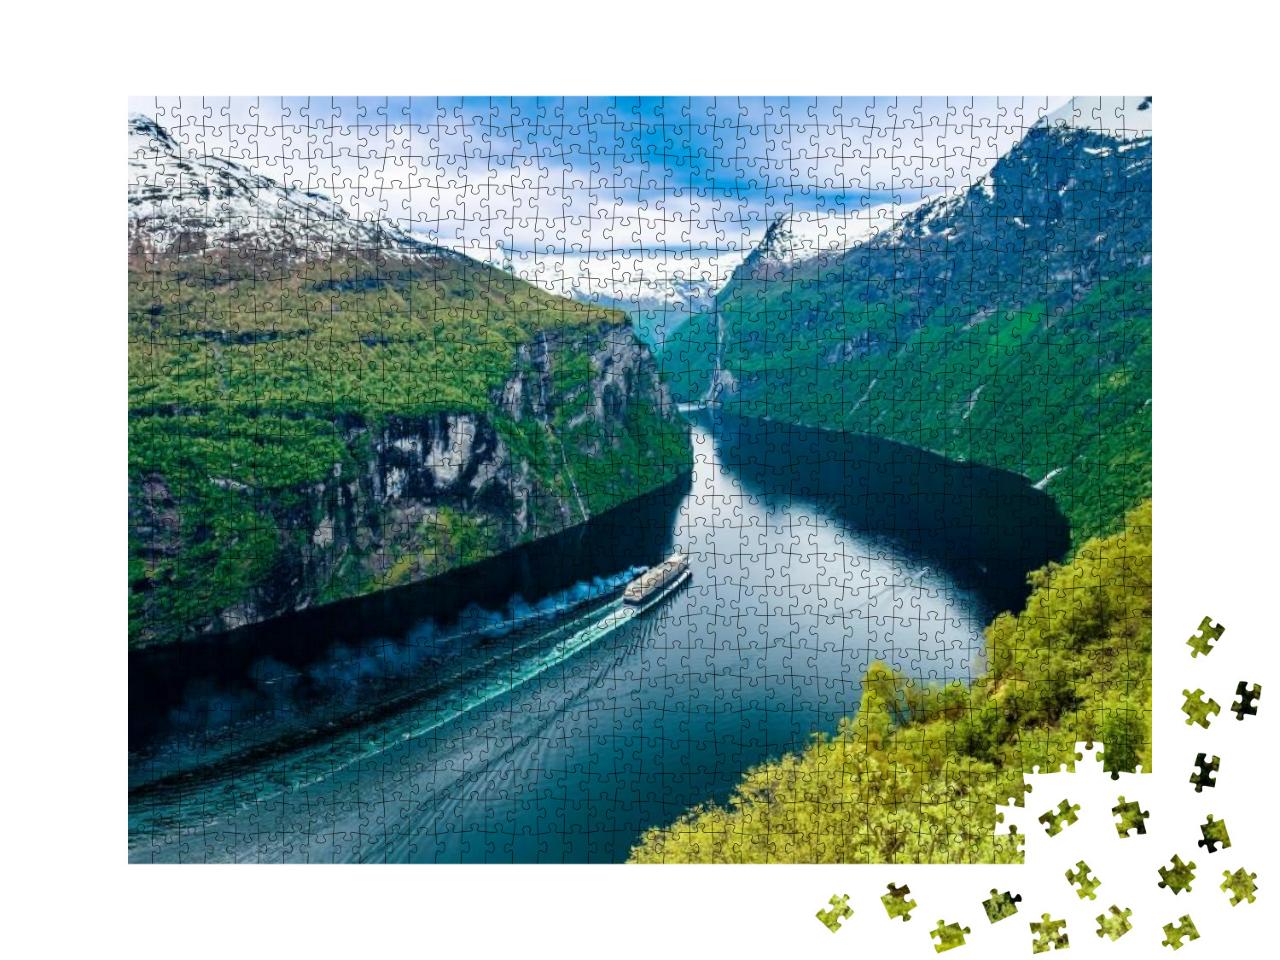 Geiranger Fjord, Beautiful Nature Norway. It is a 15-Kilo... Jigsaw Puzzle with 1000 pieces